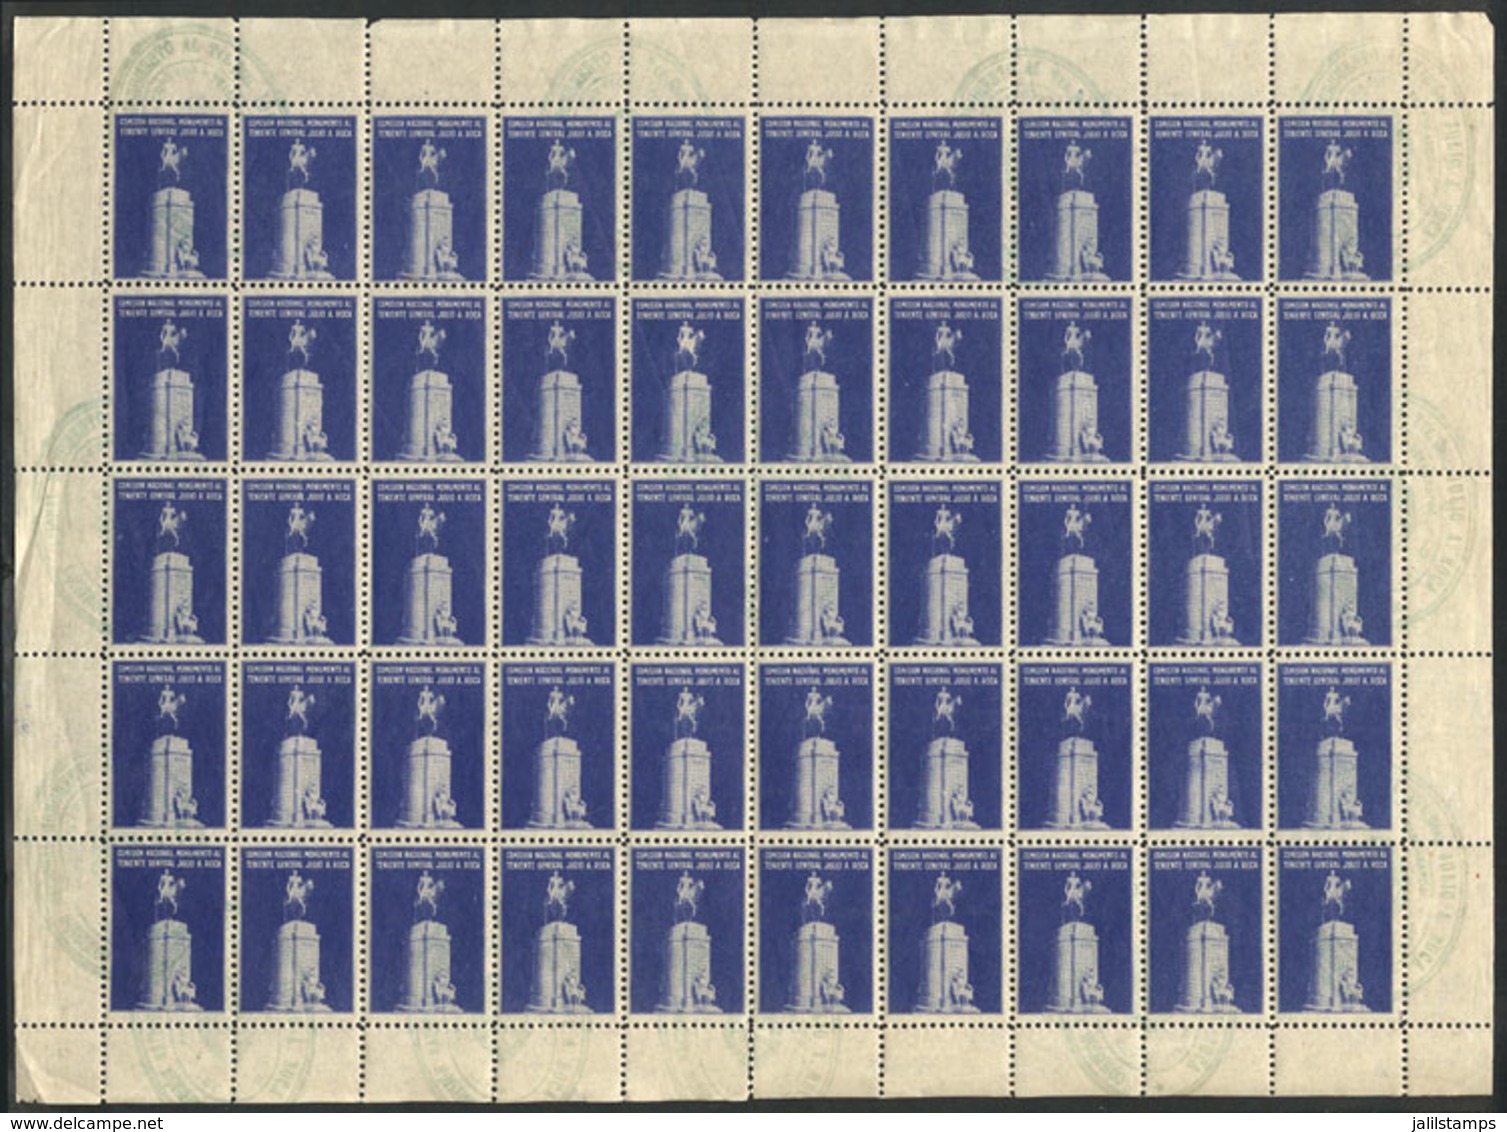 720 ARGENTINA: National Commission Of Monument To Gral. Julio A. Roca, Sheet Of 50 Cinderellas With Oval Handstamp Of Th - Vignetten (Erinnophilie)